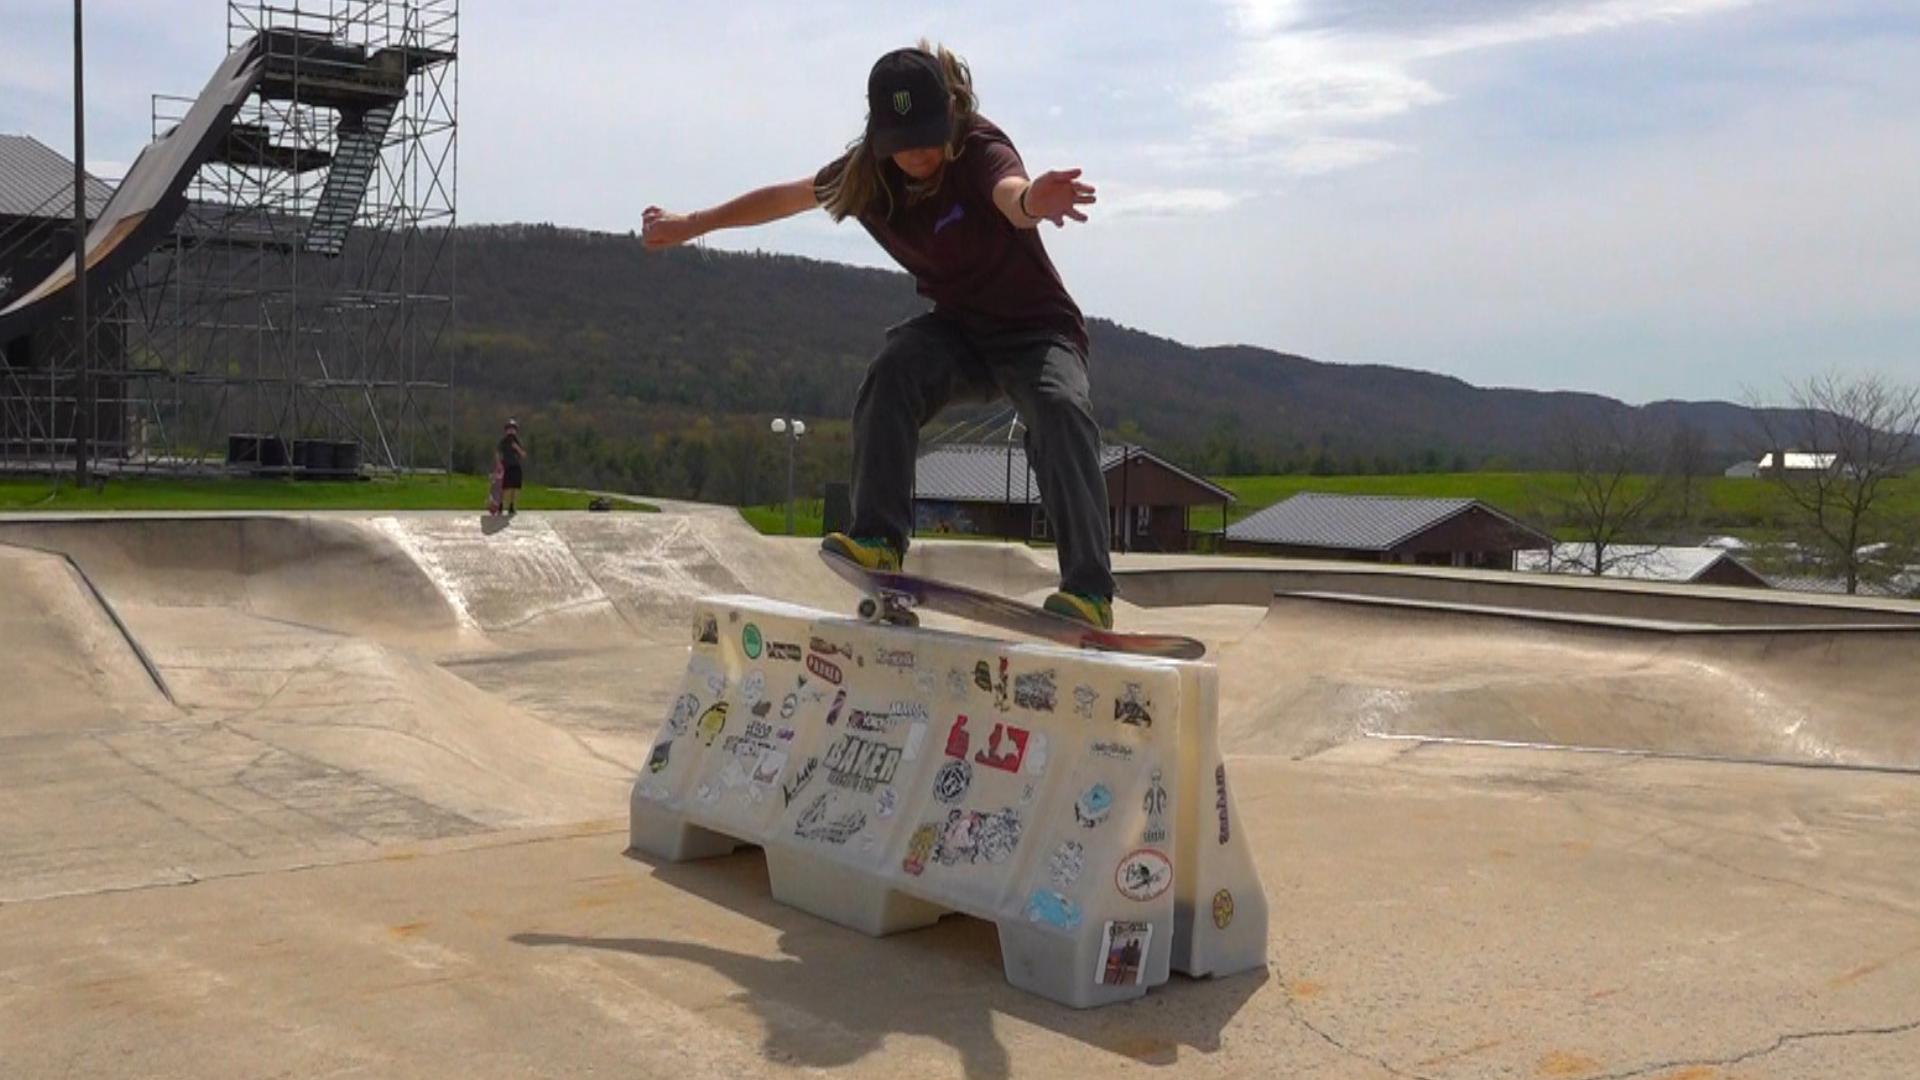 Woodward PA has become a mecca of action sports training, best known for its summer camps, the facilities have been attracting Olympic athletes looking to train.